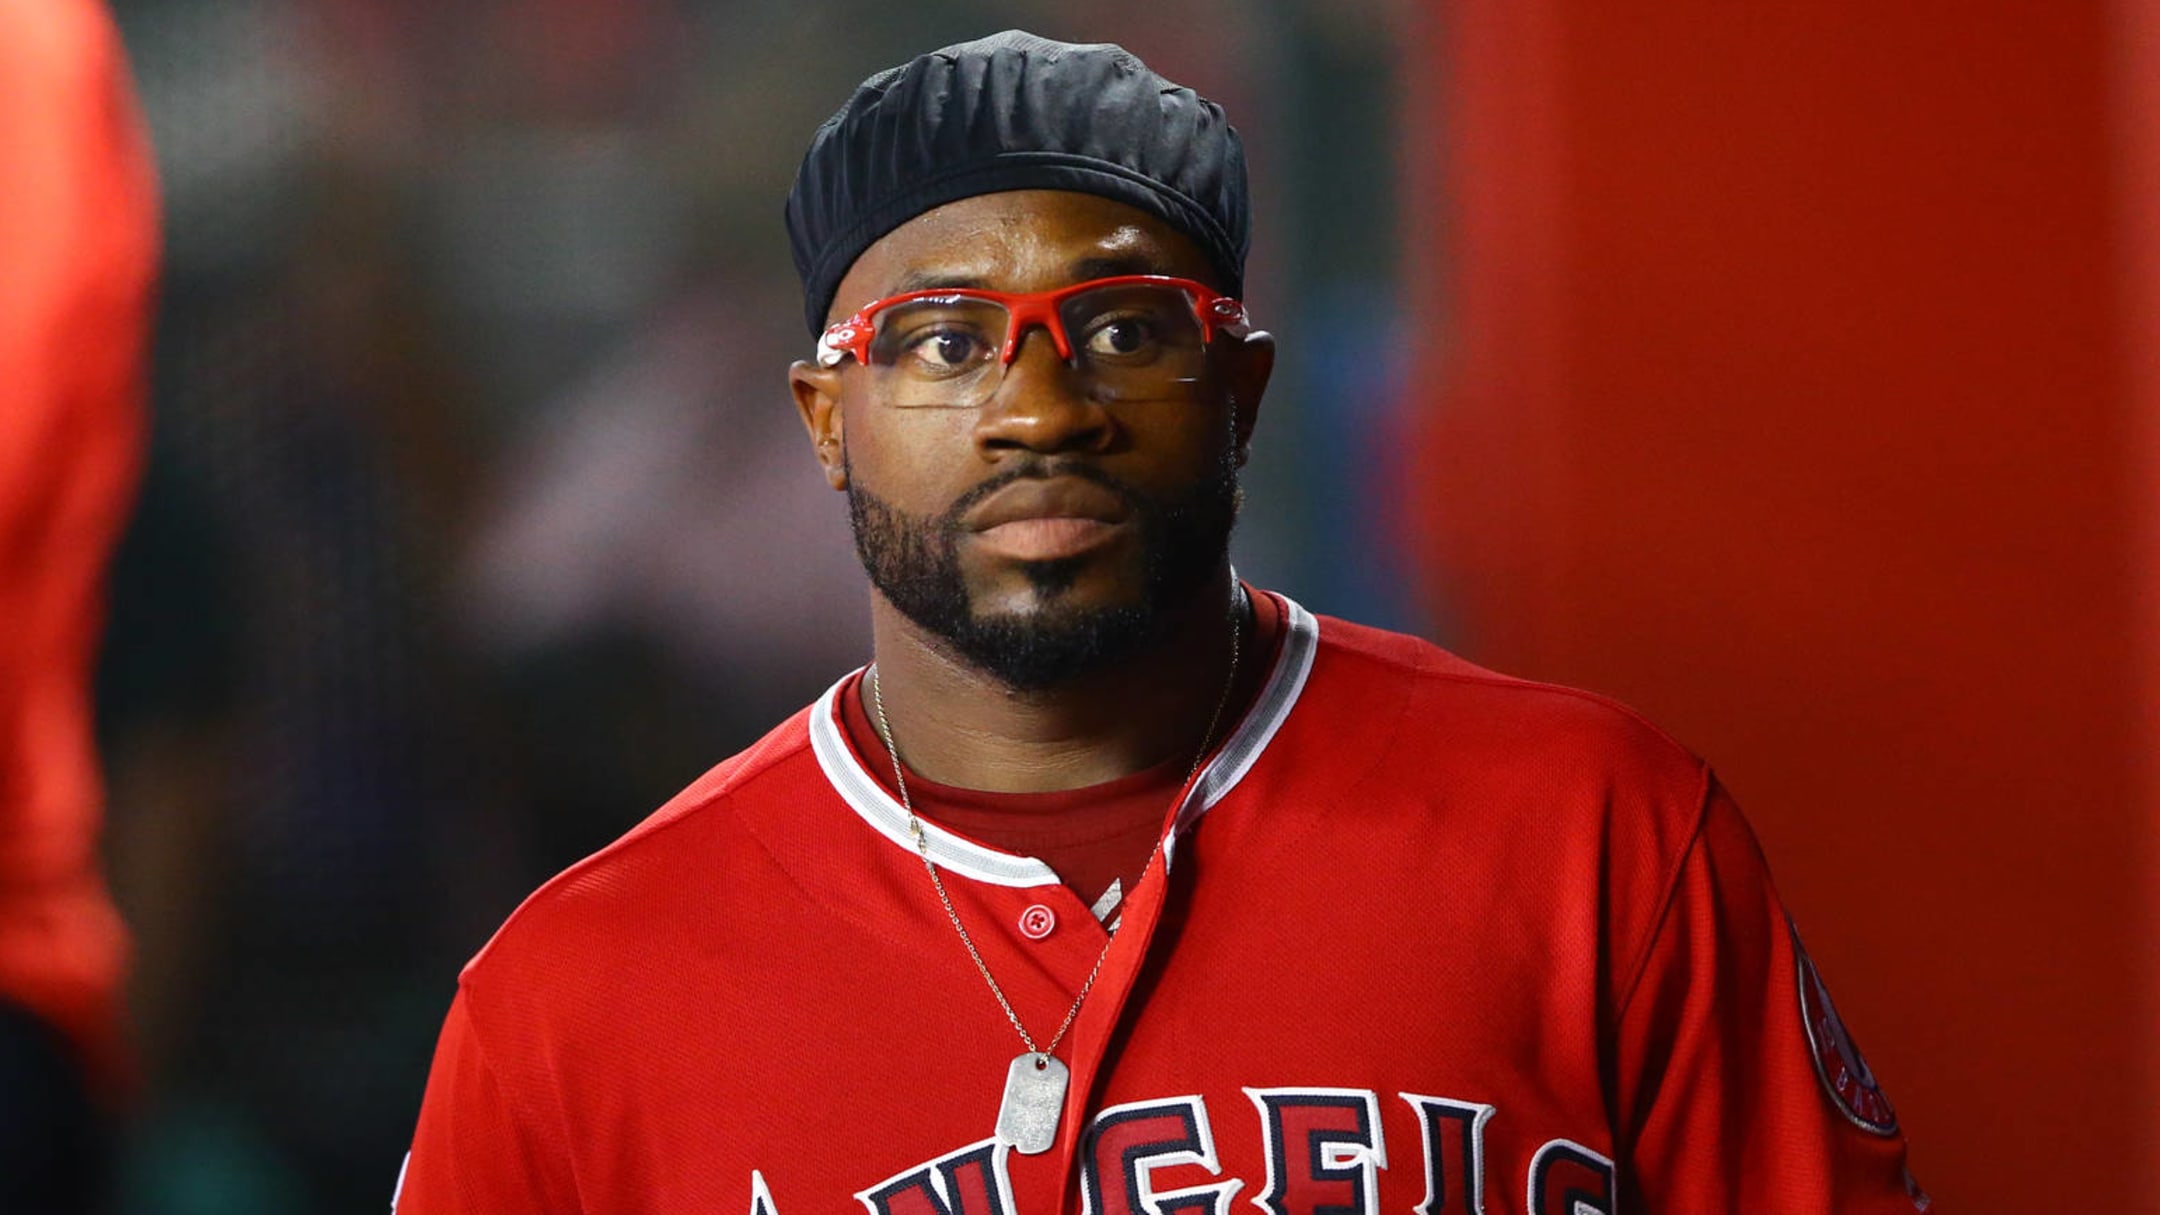 Washington Nationals reportedly set to hire Eric Young, Jr. as new